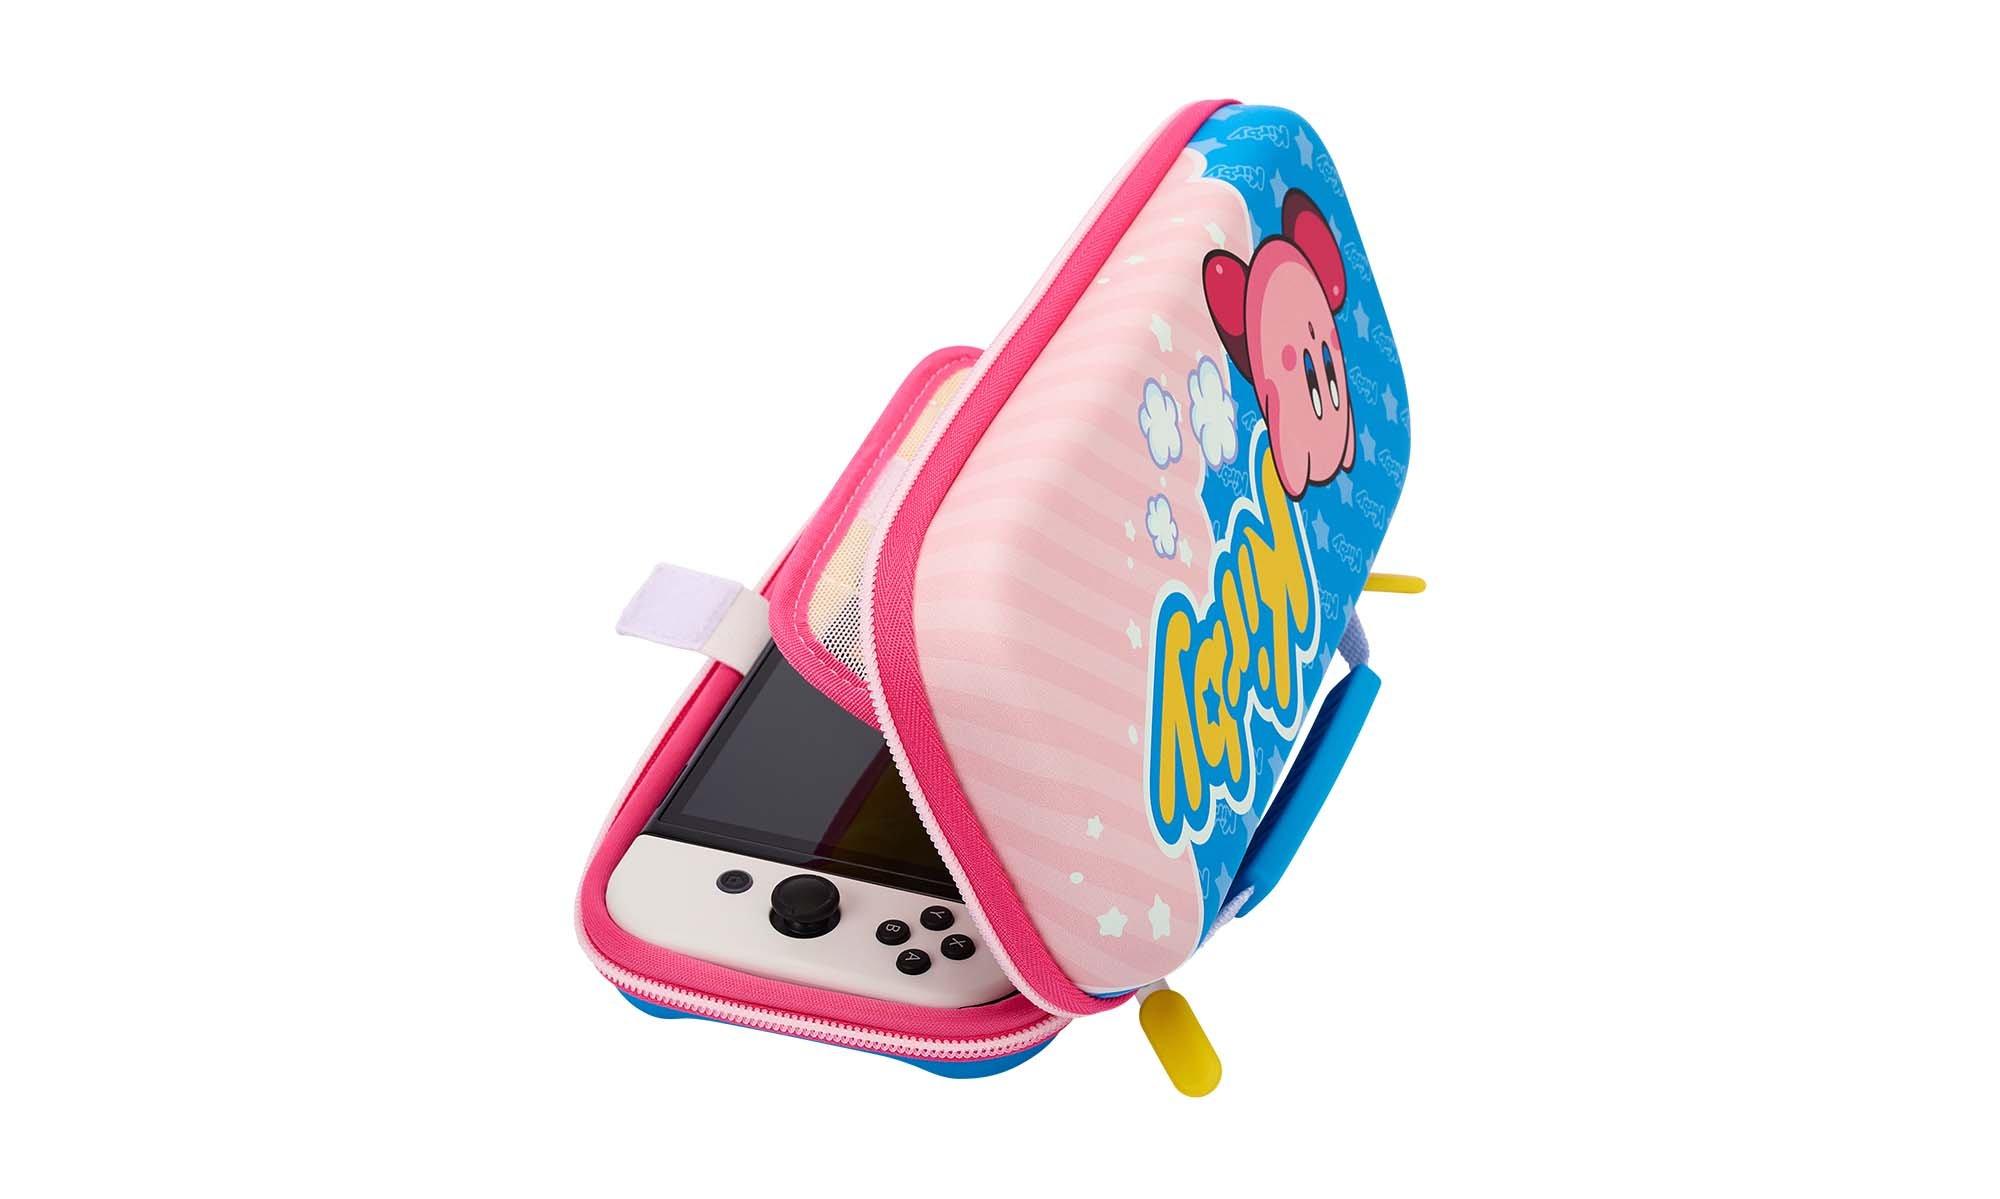 NO GAME** - Kirby Star Allies (Nintendo Switch, 2018) Case Only